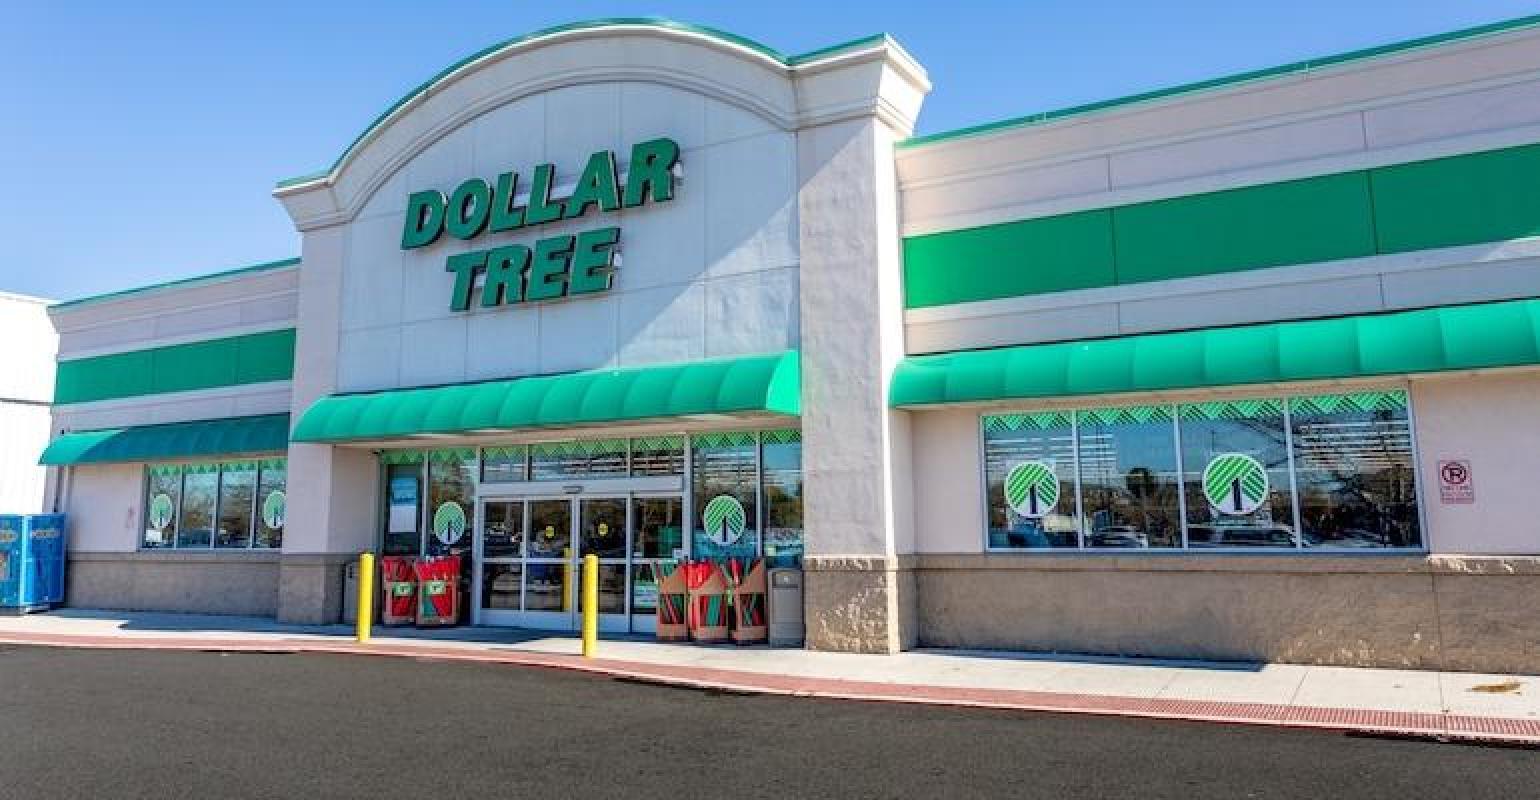 Doller Tree to let go about 90 employees | Supermarket News